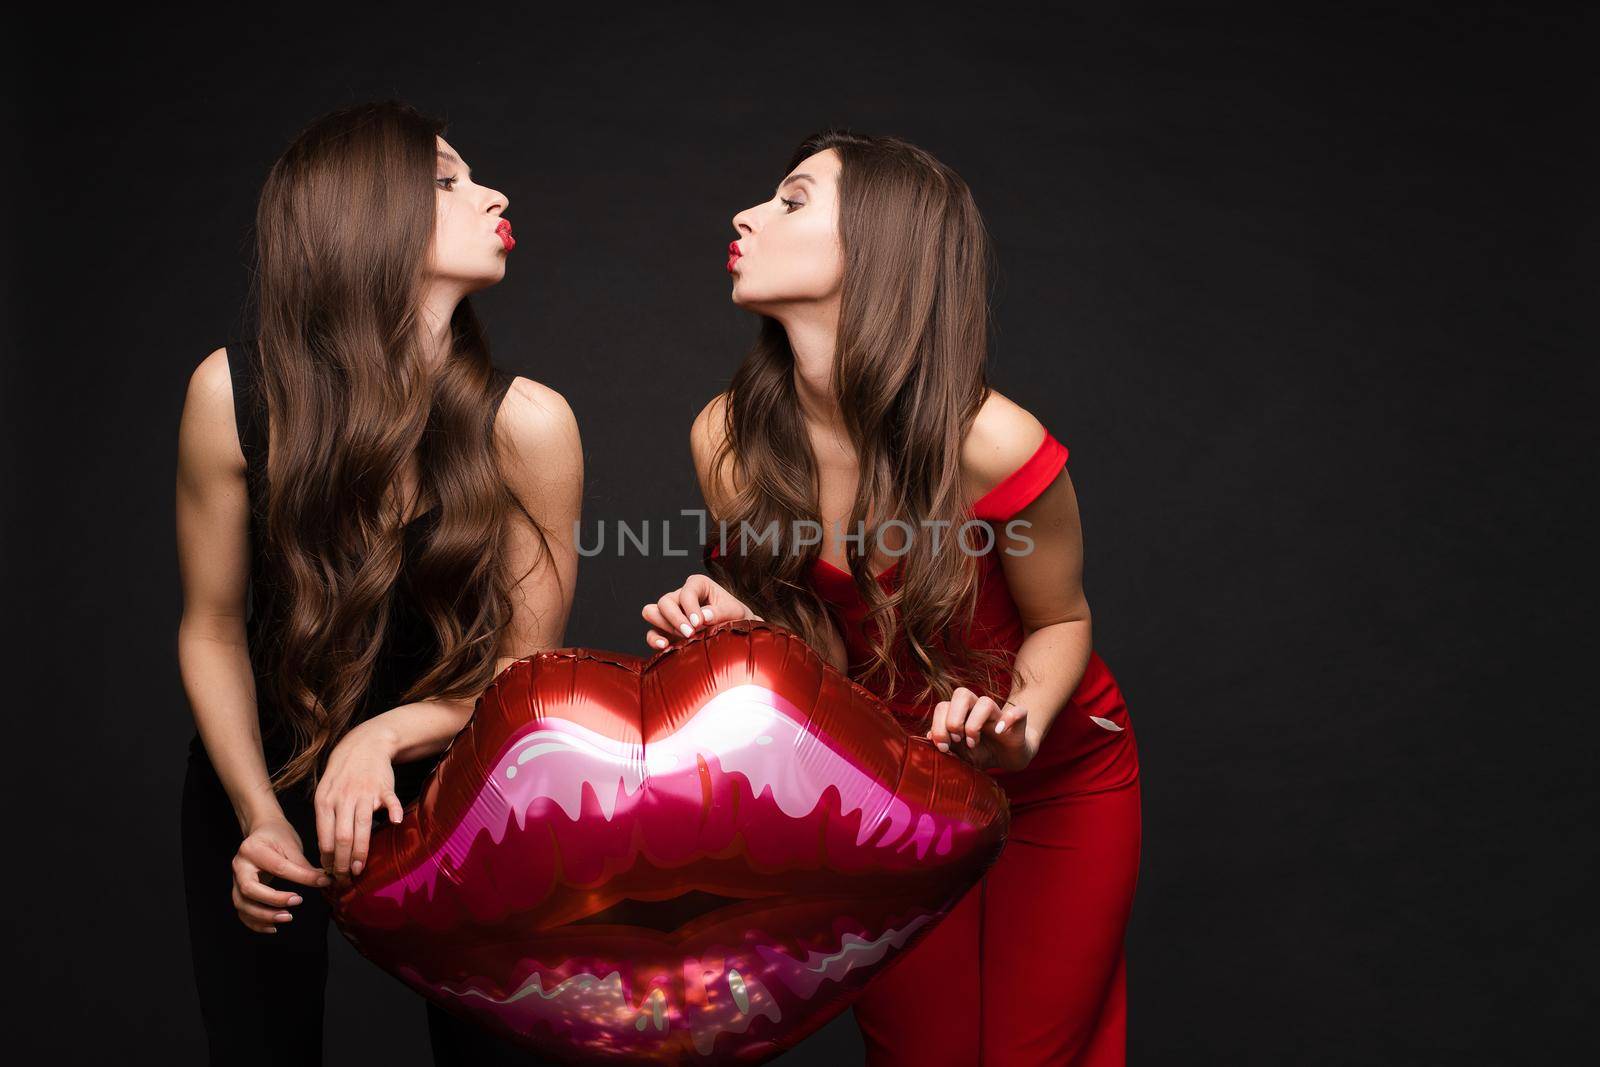 Close up of brunette twins with long hair in black and red costumes posing at camera. Young sisters standing together and holding red lips balloon. Gorgeous models with red lips sending air kisses.